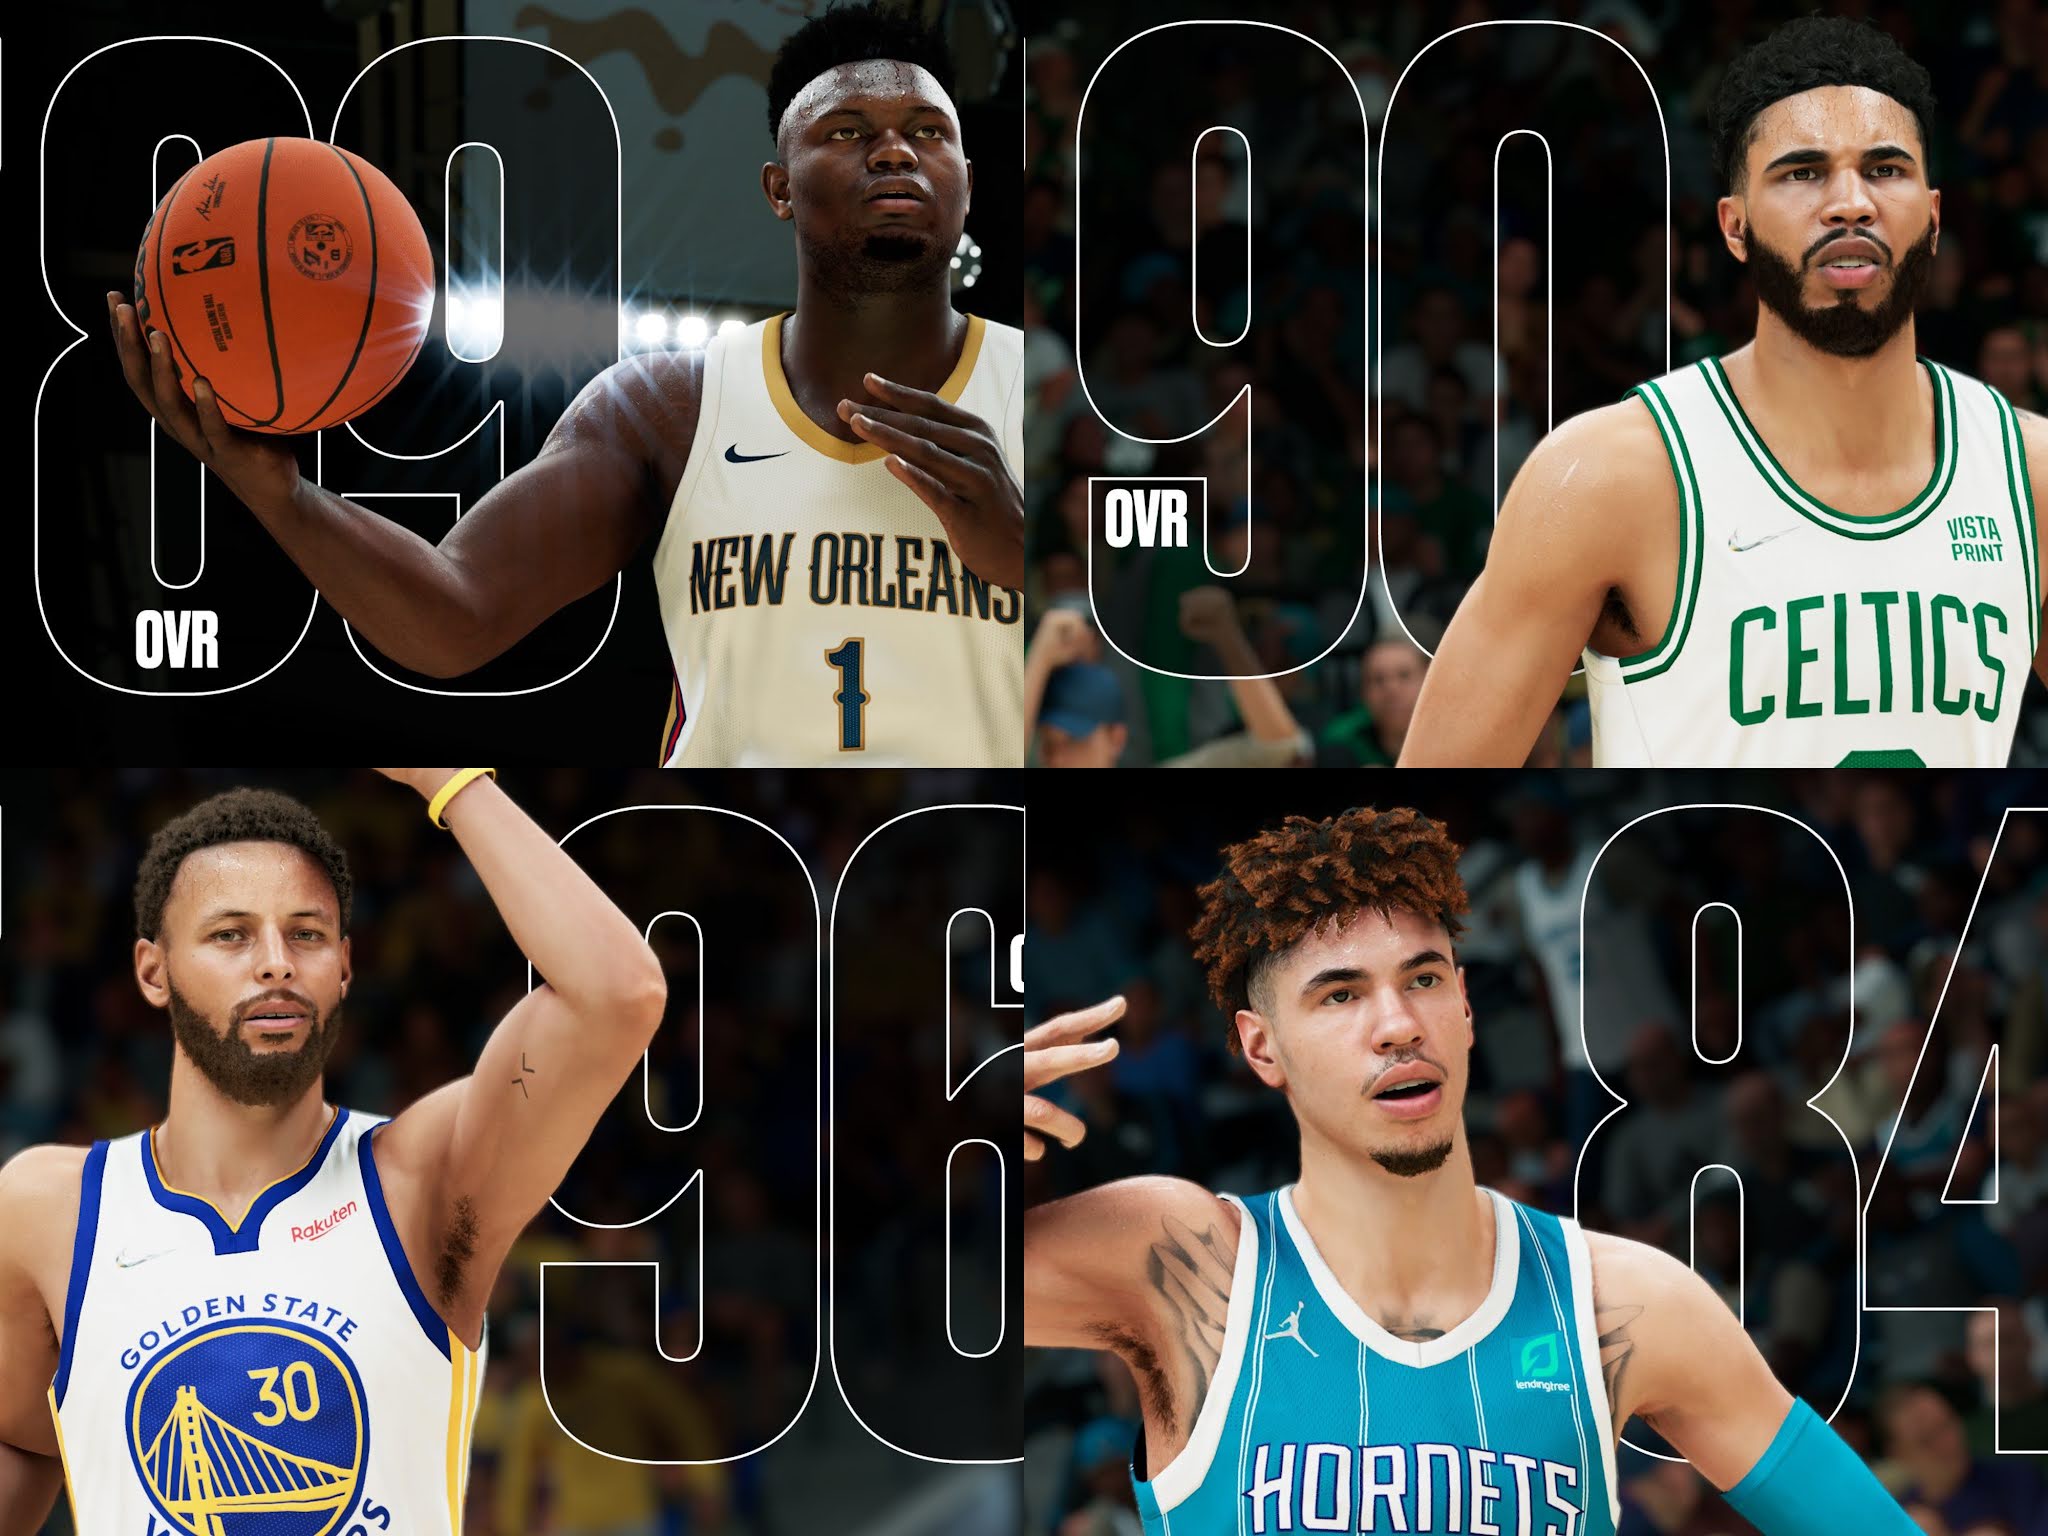 New NBA 2K22 Player Ratings Update for All-Star Weekend Revealed